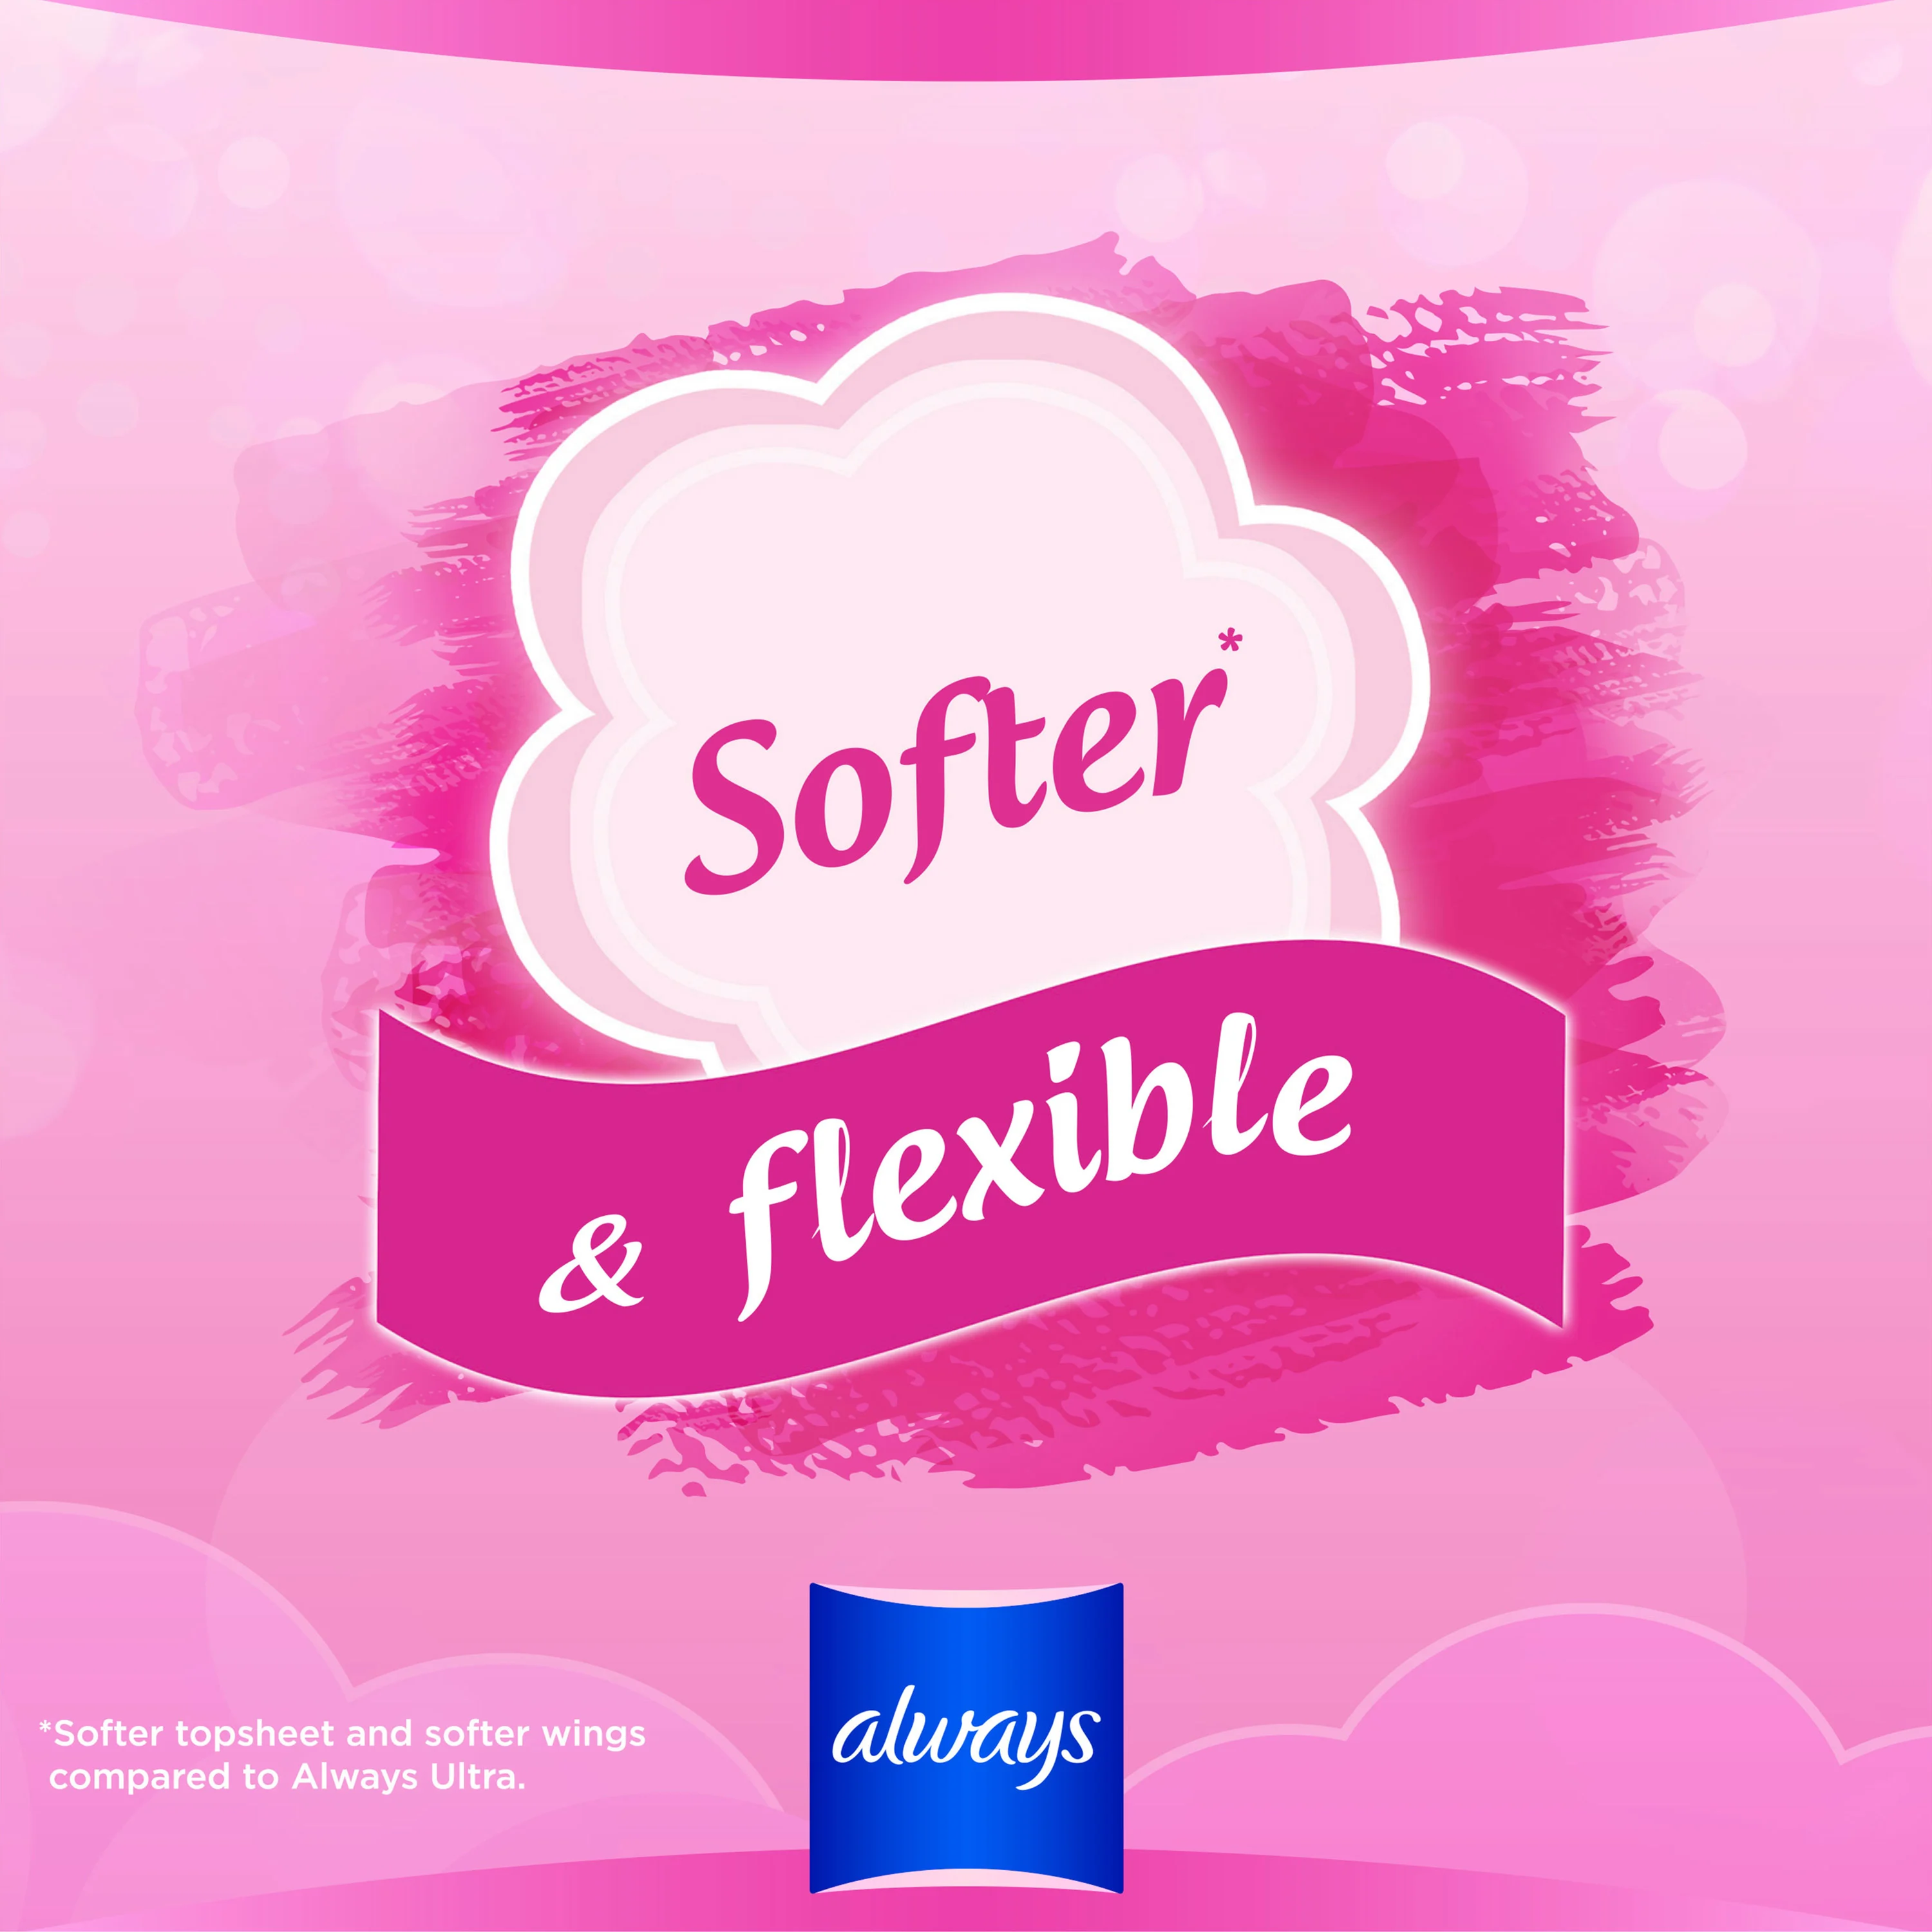 Always Sensitive is Softer* & flexible (*Softer topsheet and softer wings compared to Always Ultra)